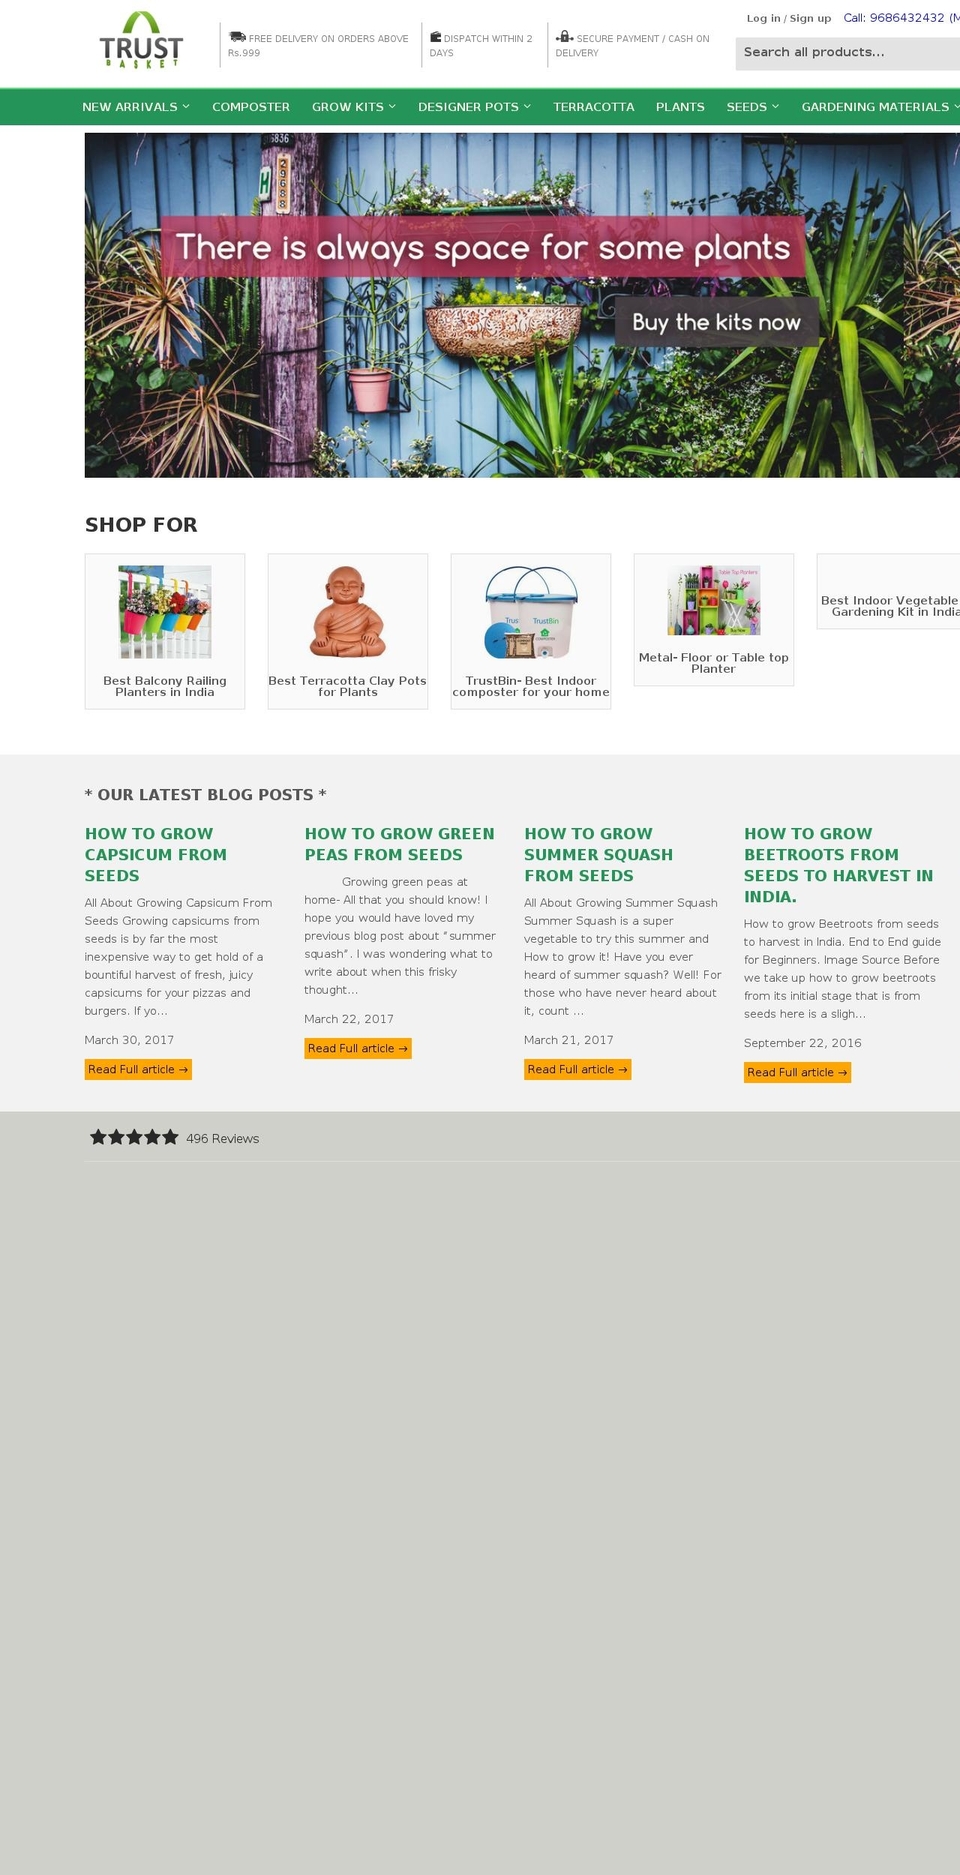 TrustBasket MB Master Shopify theme site example trustbasket.com